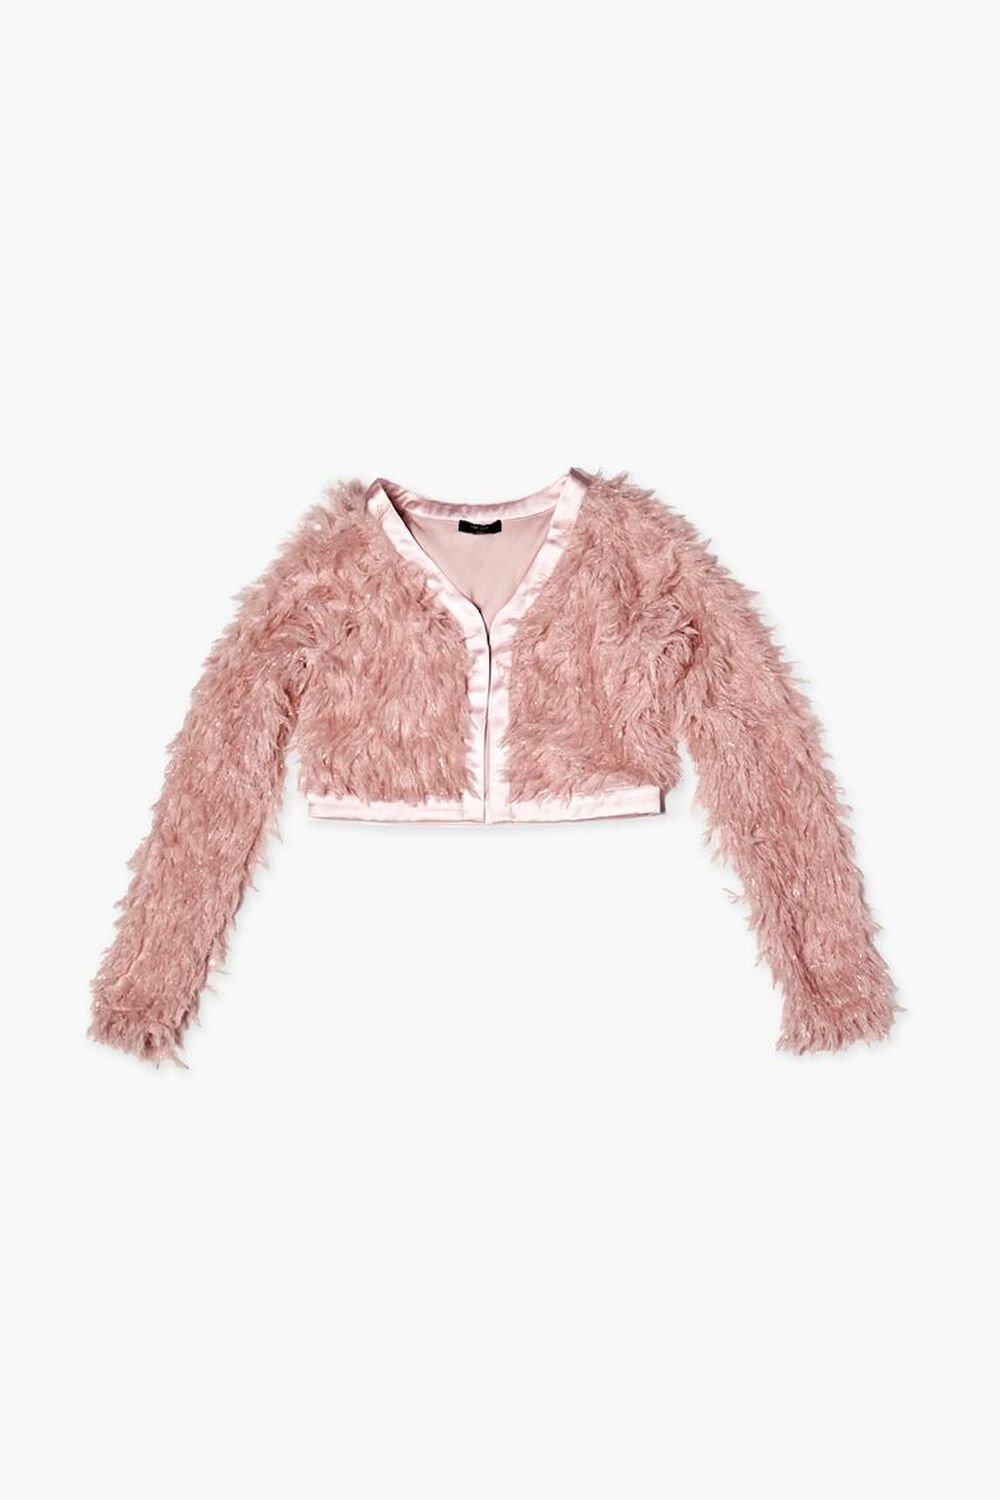 PINK Girls Faux Feather Open-Front Jacket (Kids), image 1